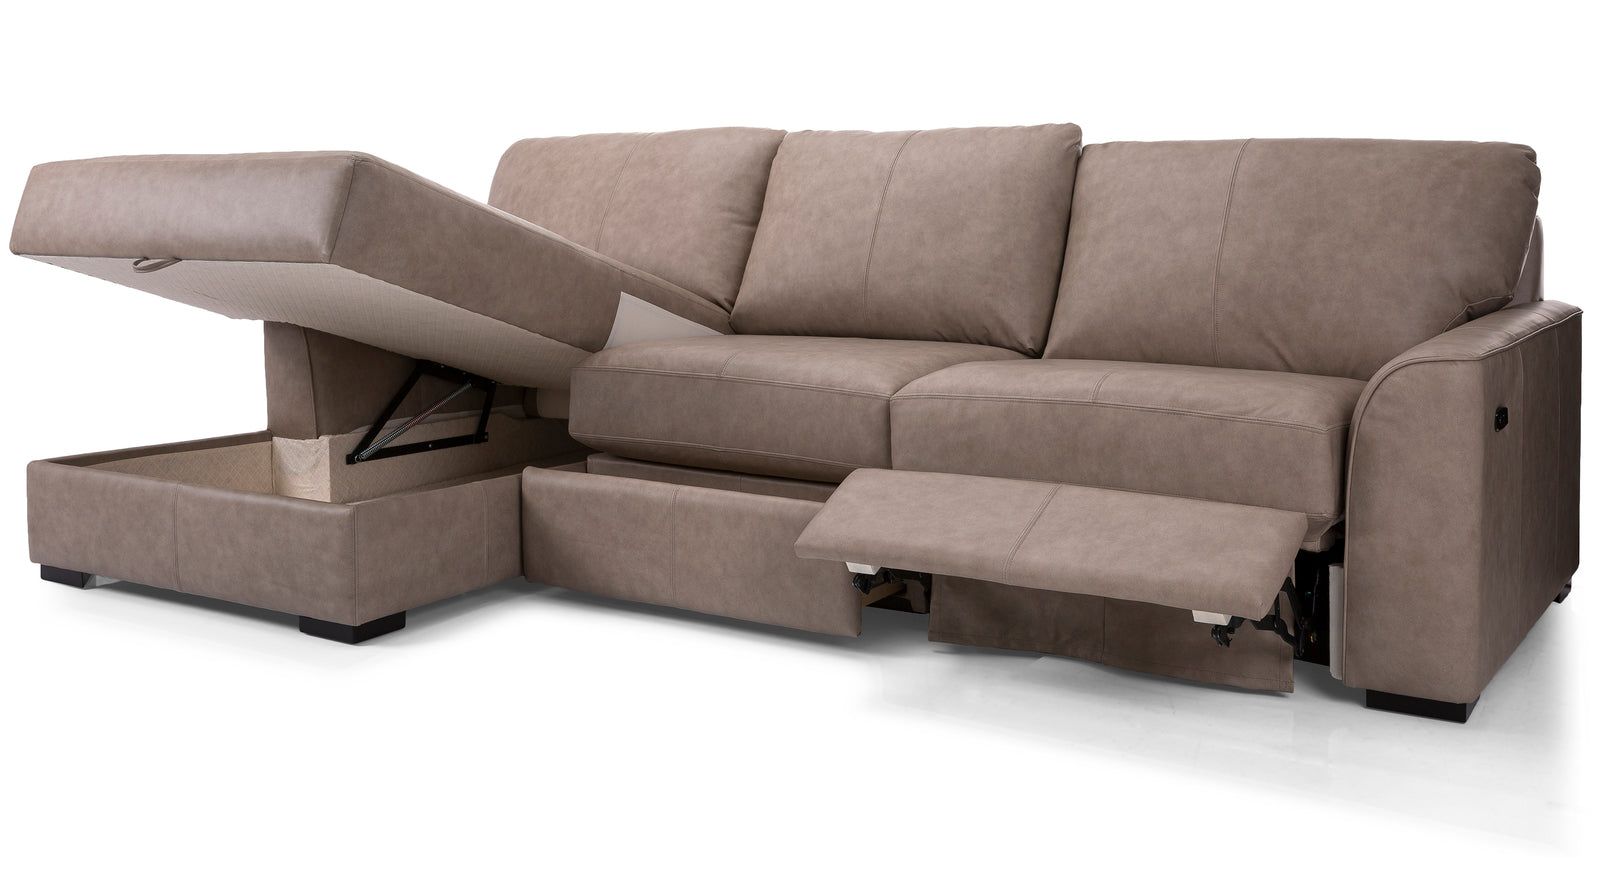 Affordable Living: How Layaway Sectional
Sofas Make Home Decor Easy